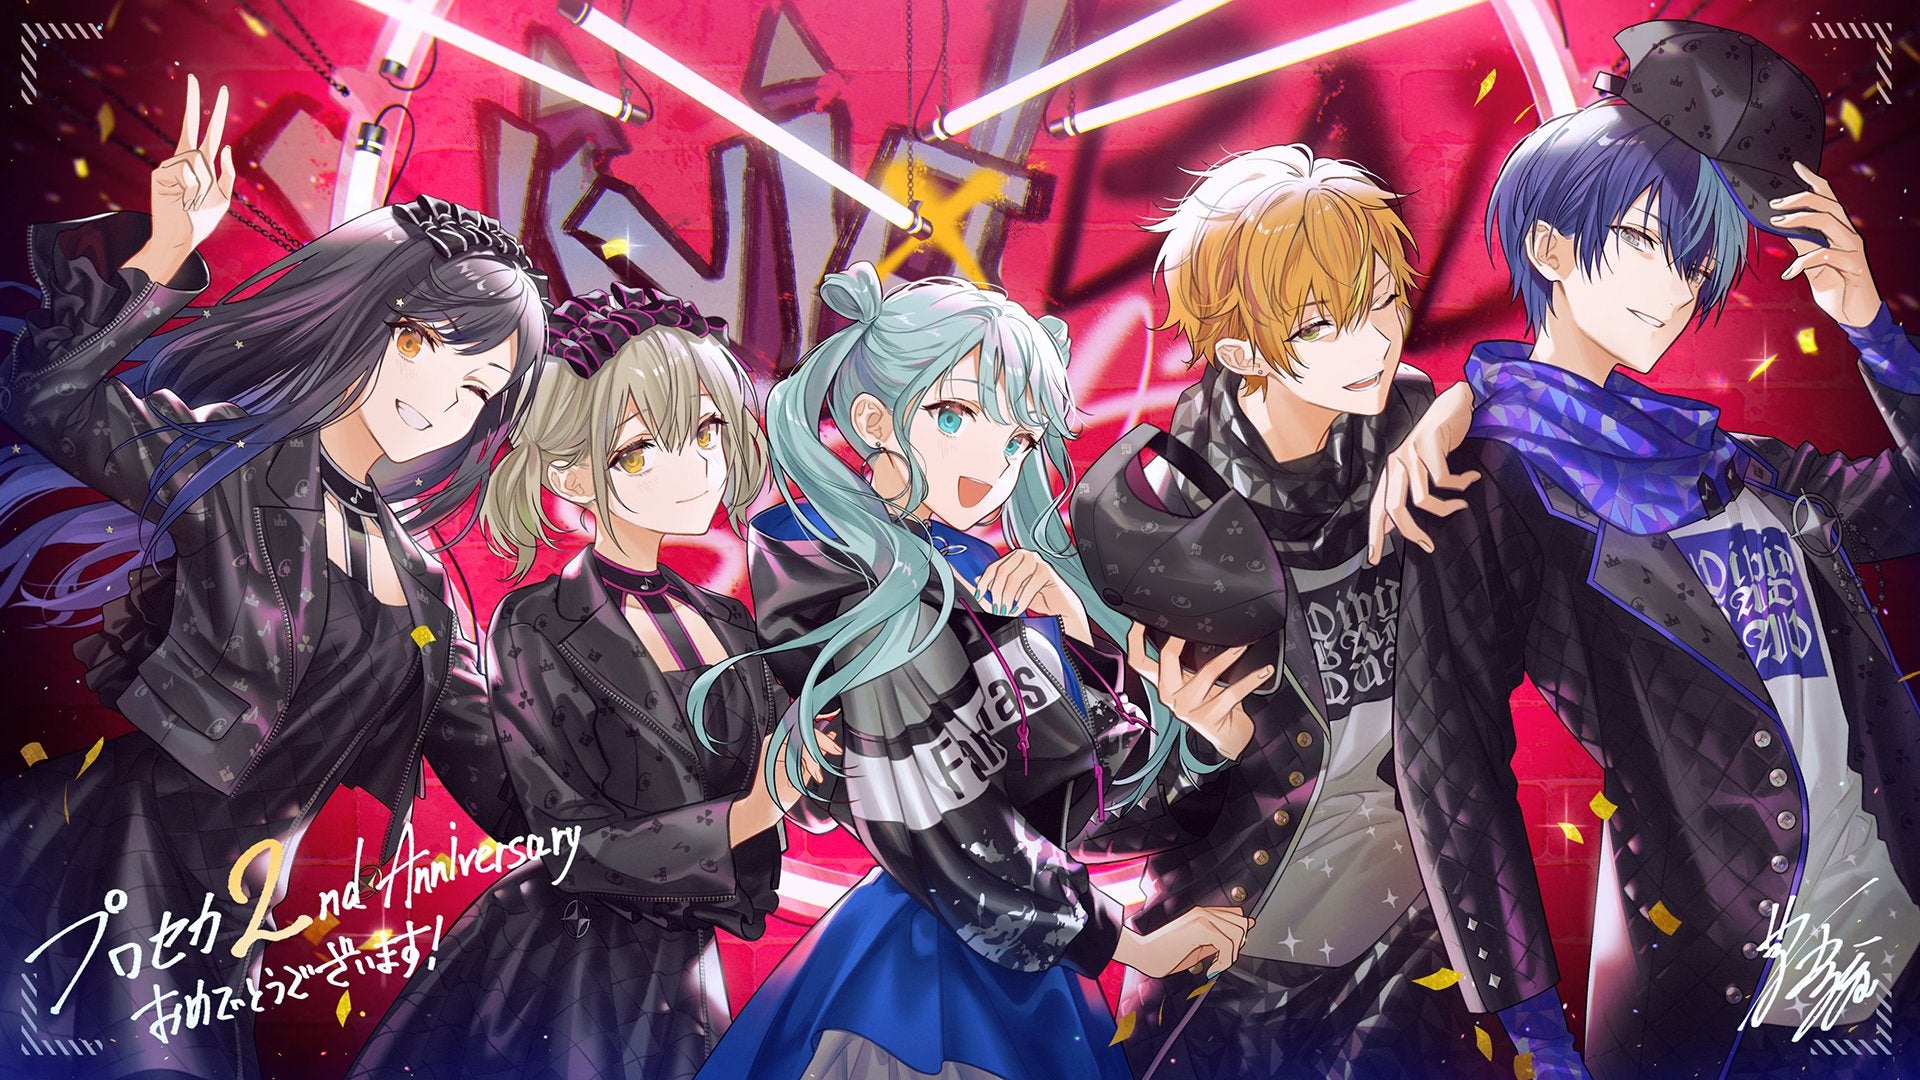 VIVID BAD SQUAD Illustration for 2nd Anniversary from JP Official Twitter